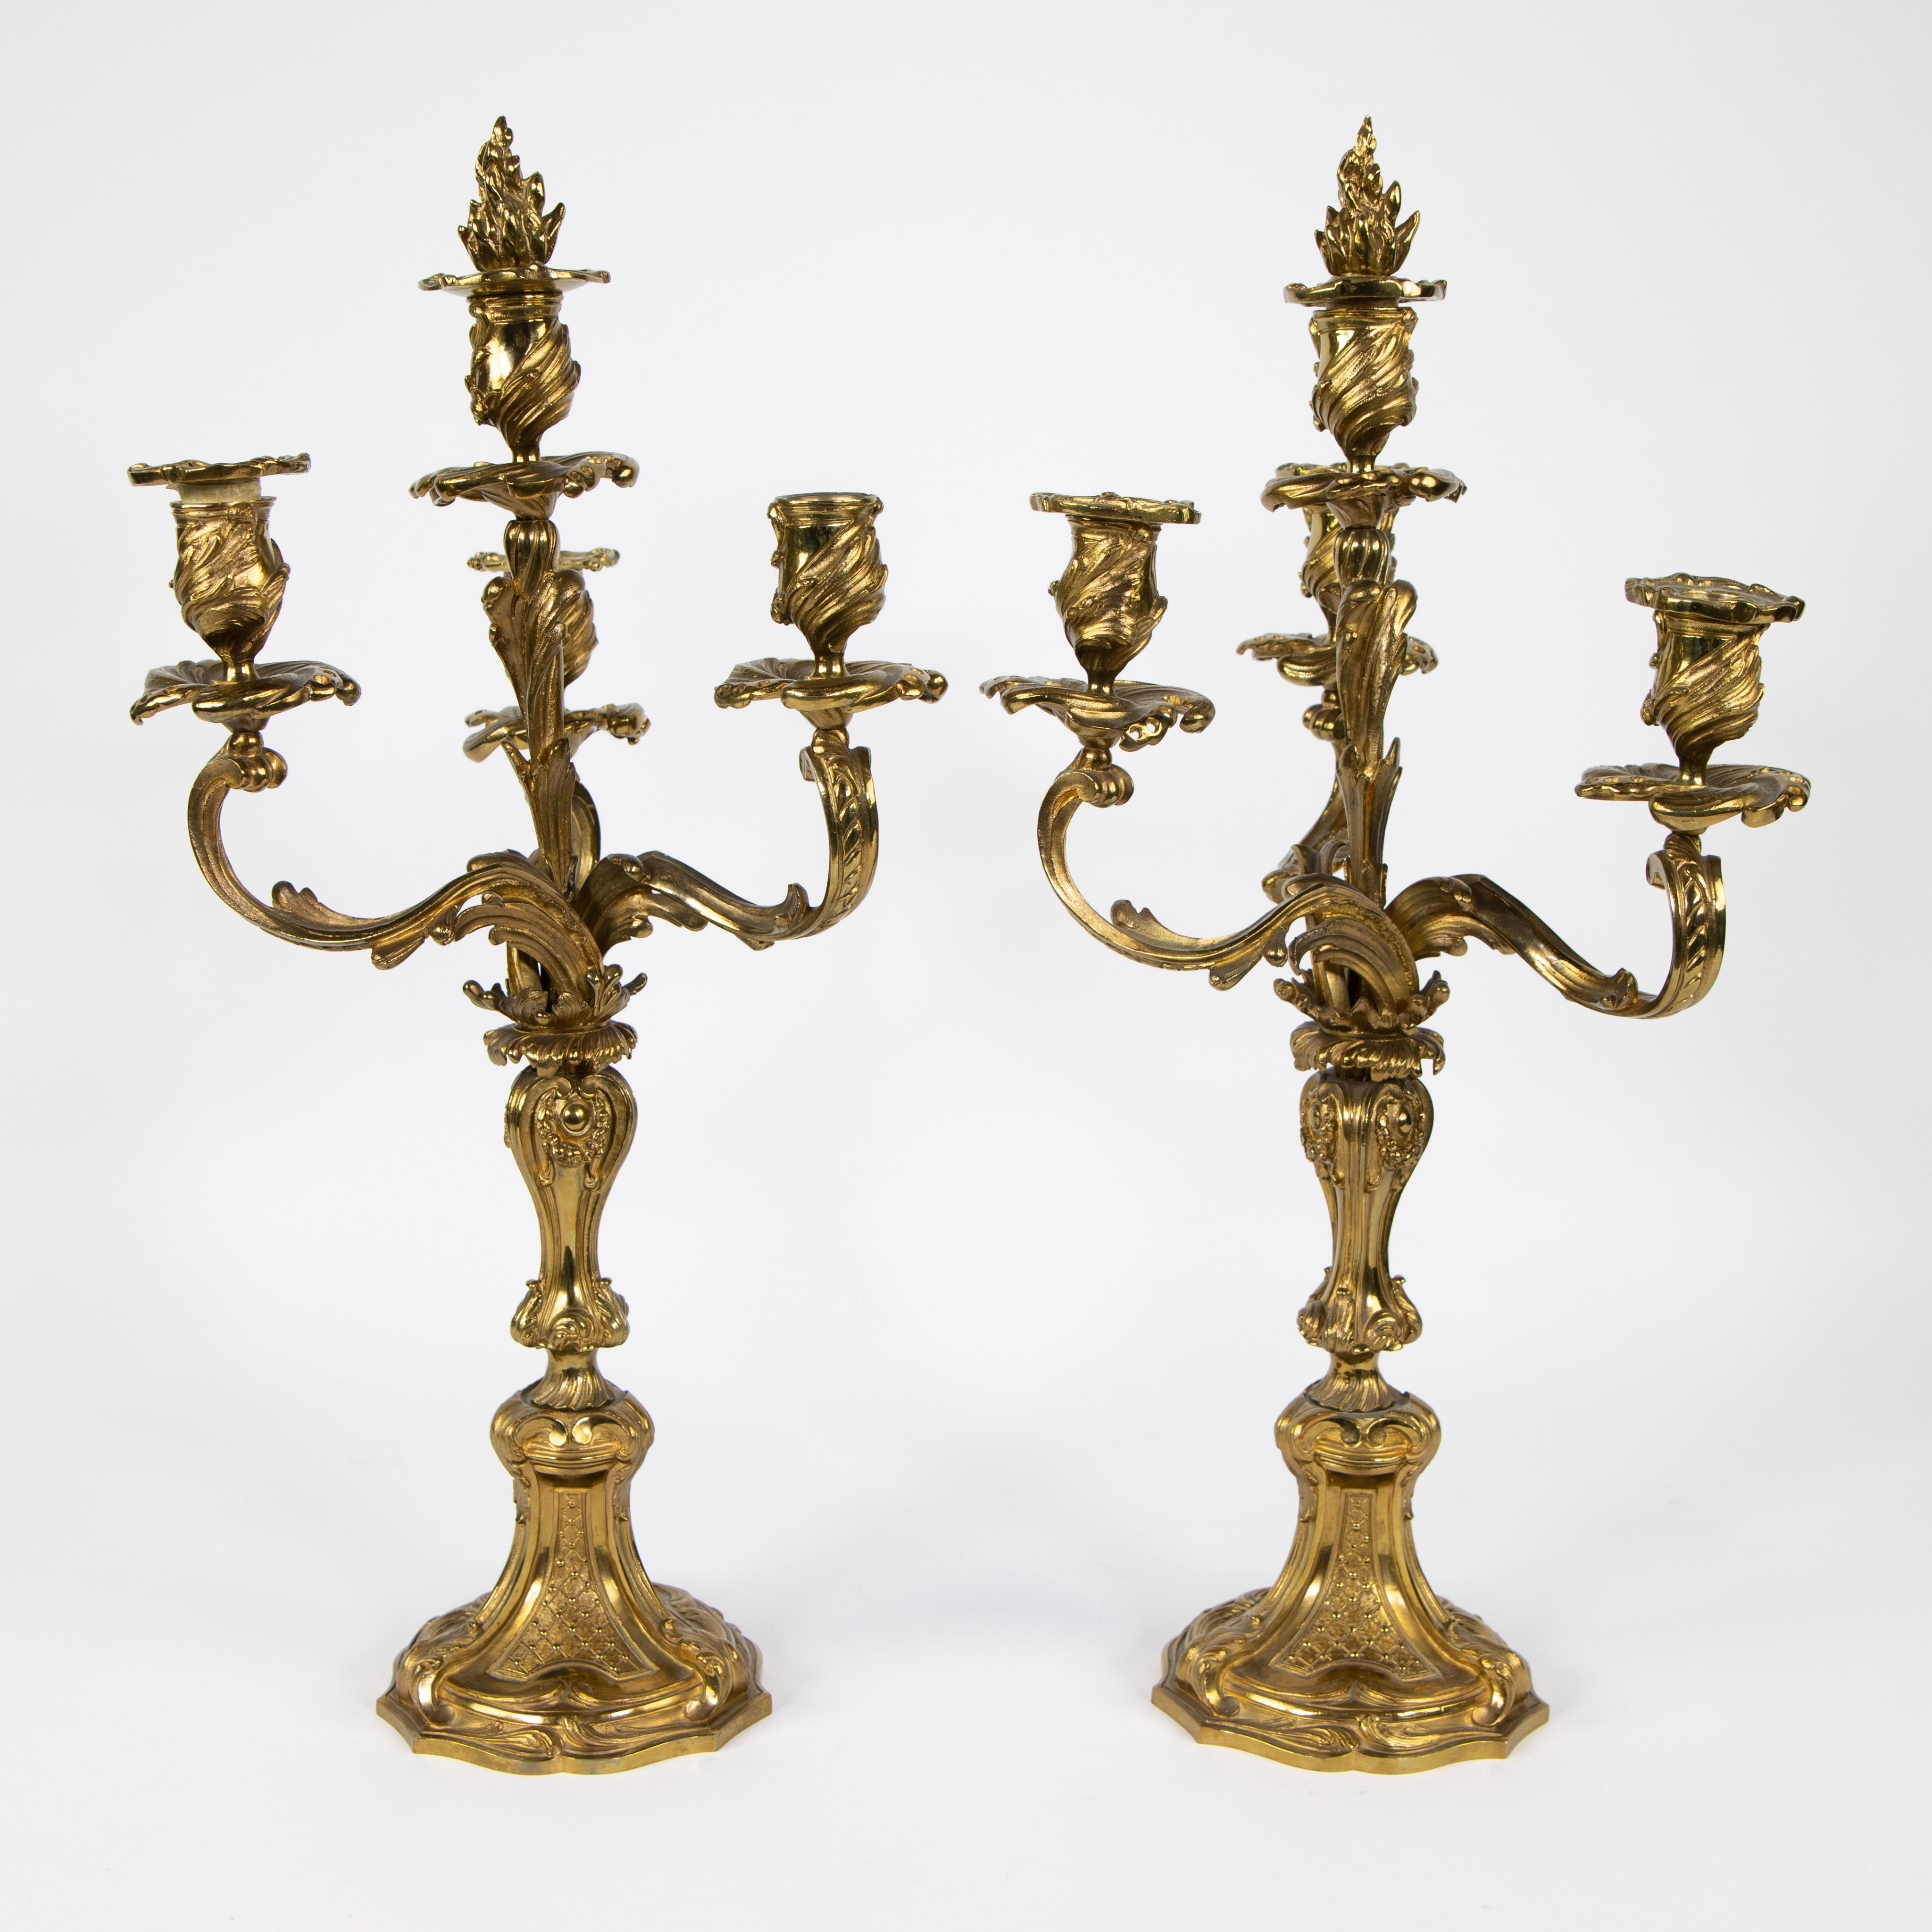 A pair of French gilt bronze Louis XV style four-light candlesticks, 19th/20th C.